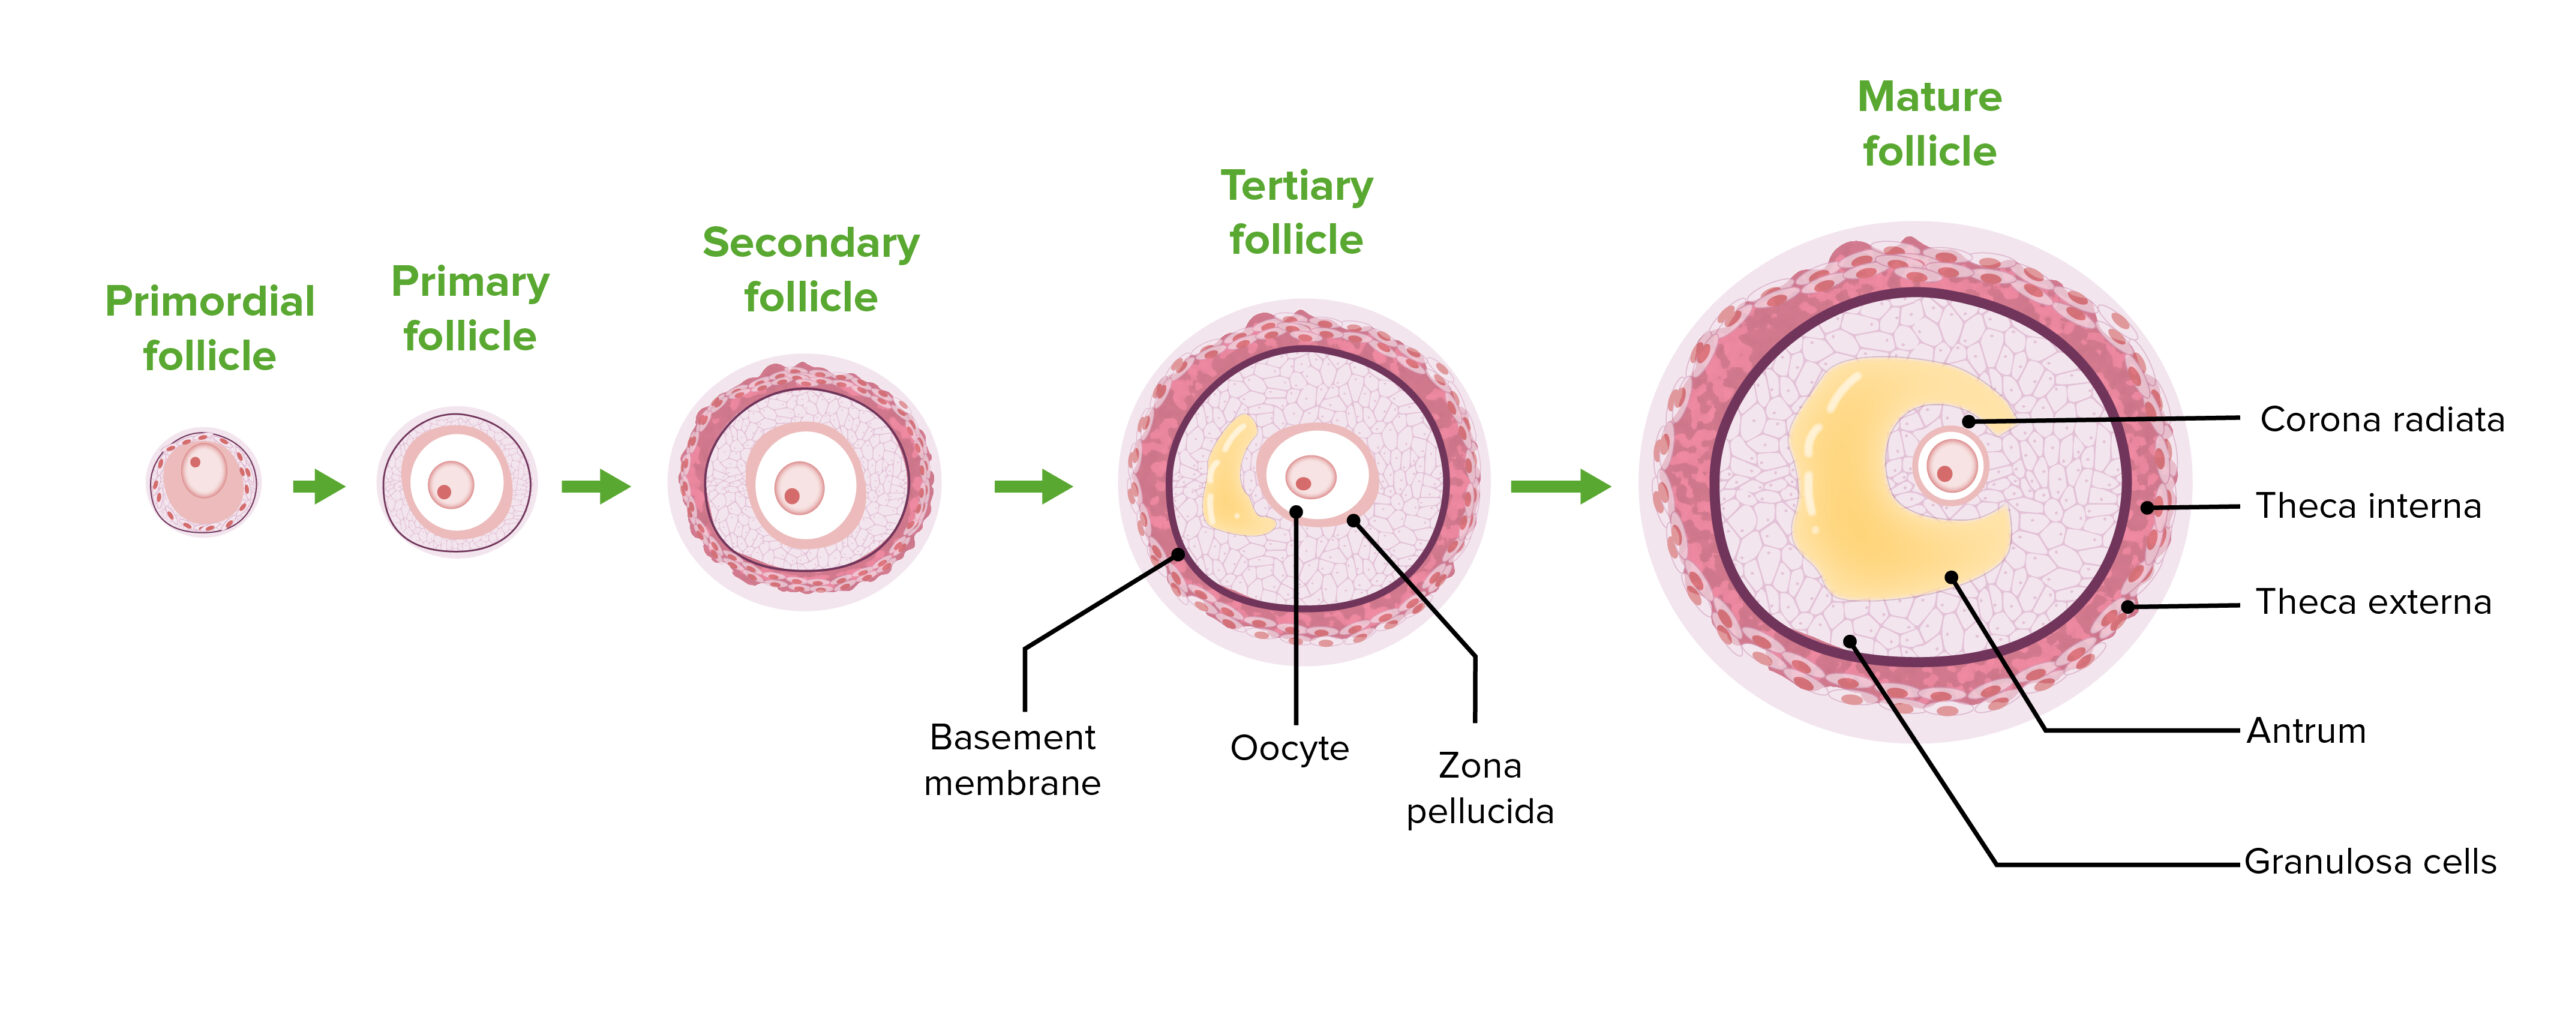 Acellular Membrane Formed By The Secondary Oocyte Is